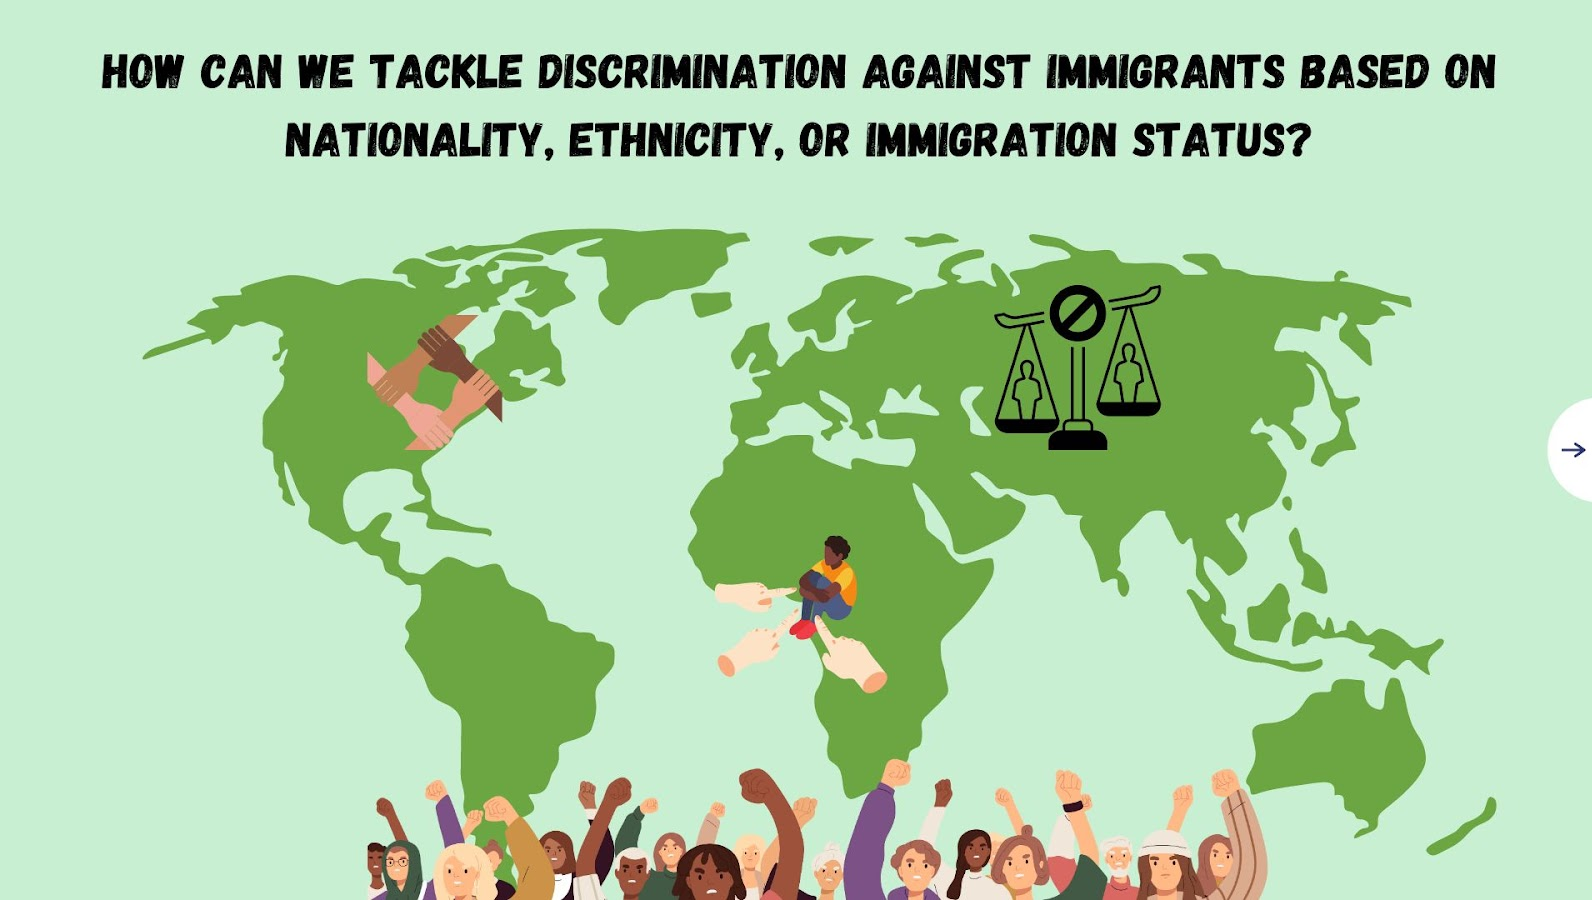 How Can We Tackle Discrimination Against Immigrants Based on Nationality, Ethnicity, or Immigration Status?